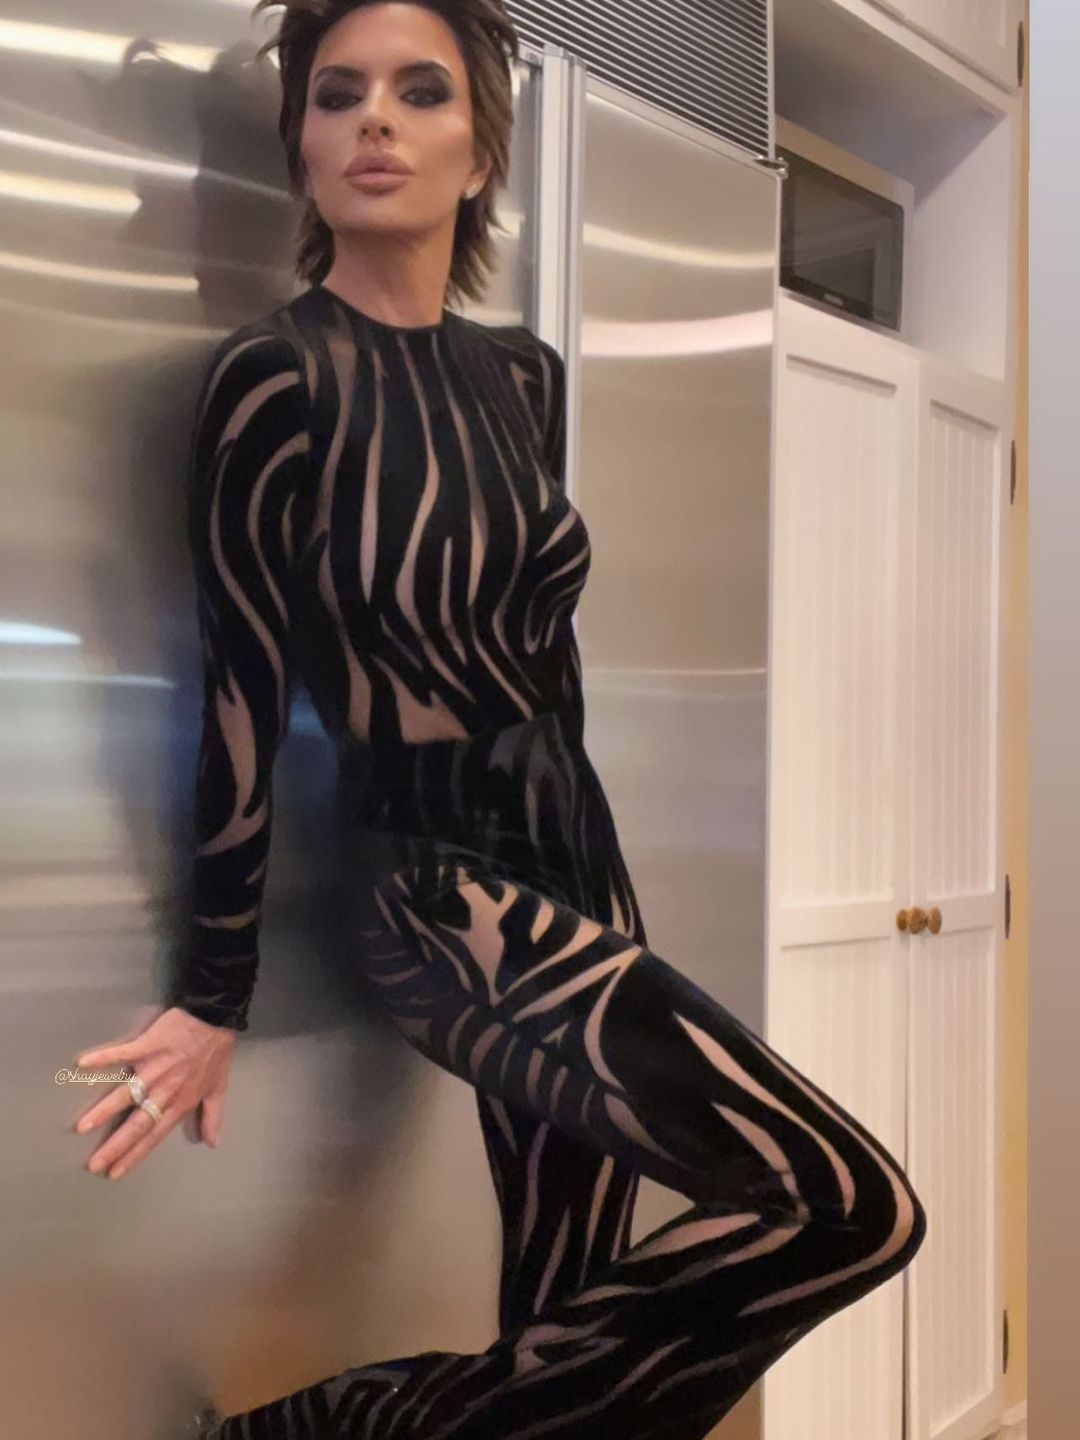 Lisa leaning against a wall and posing in the catsuit